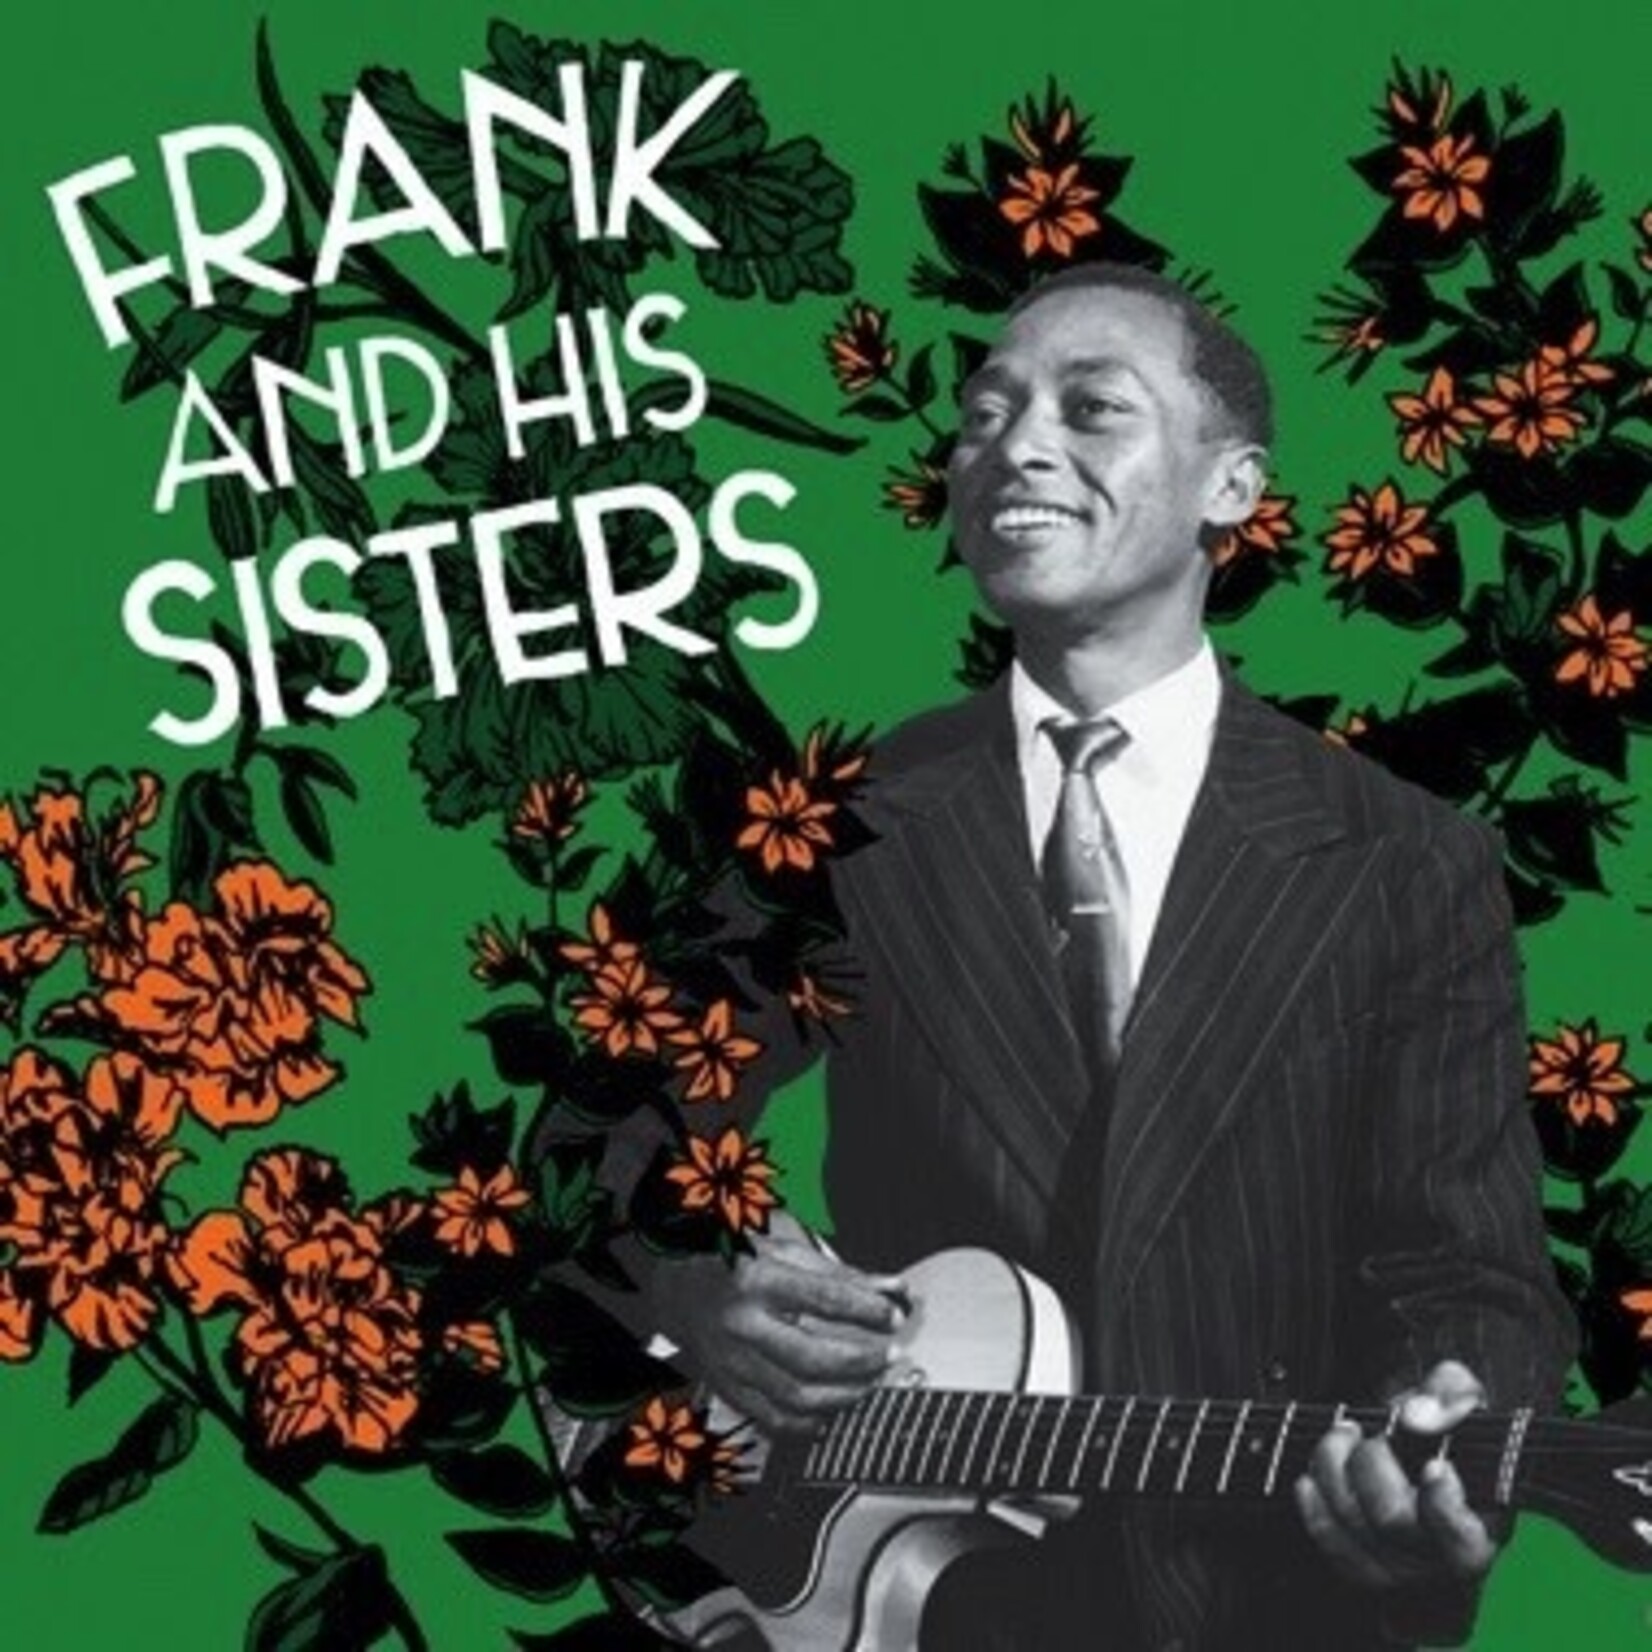 Mississippi Frank and his Sisters - Frank and his Sisters (LP)